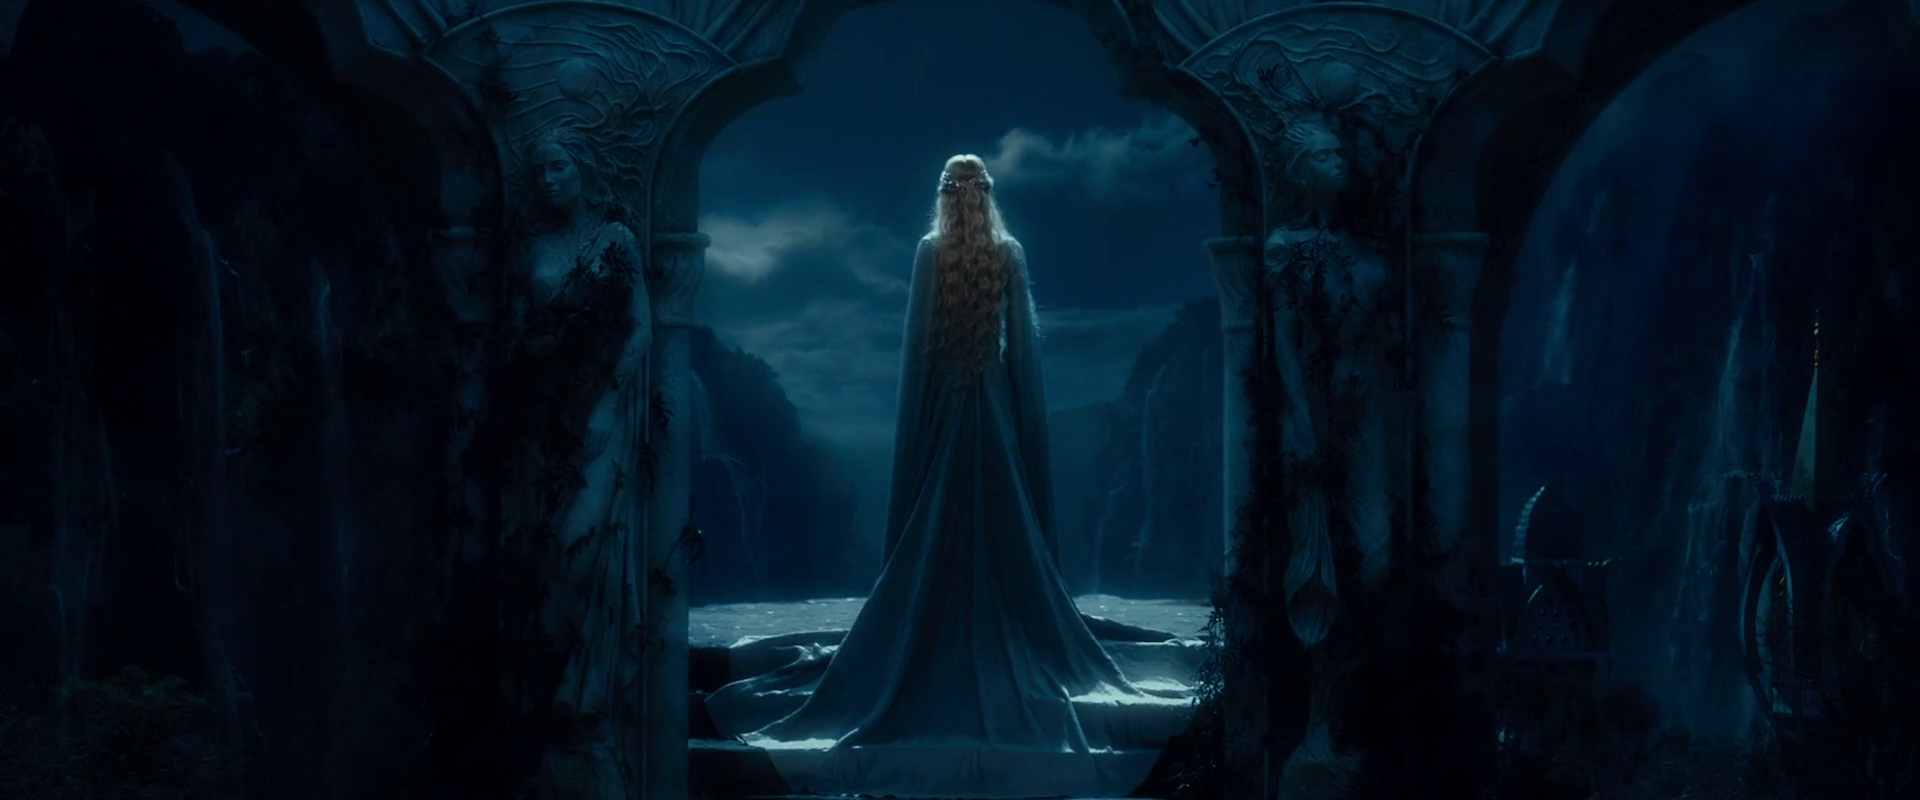 Galadriel Image The Hobbit HD Wallpaper And